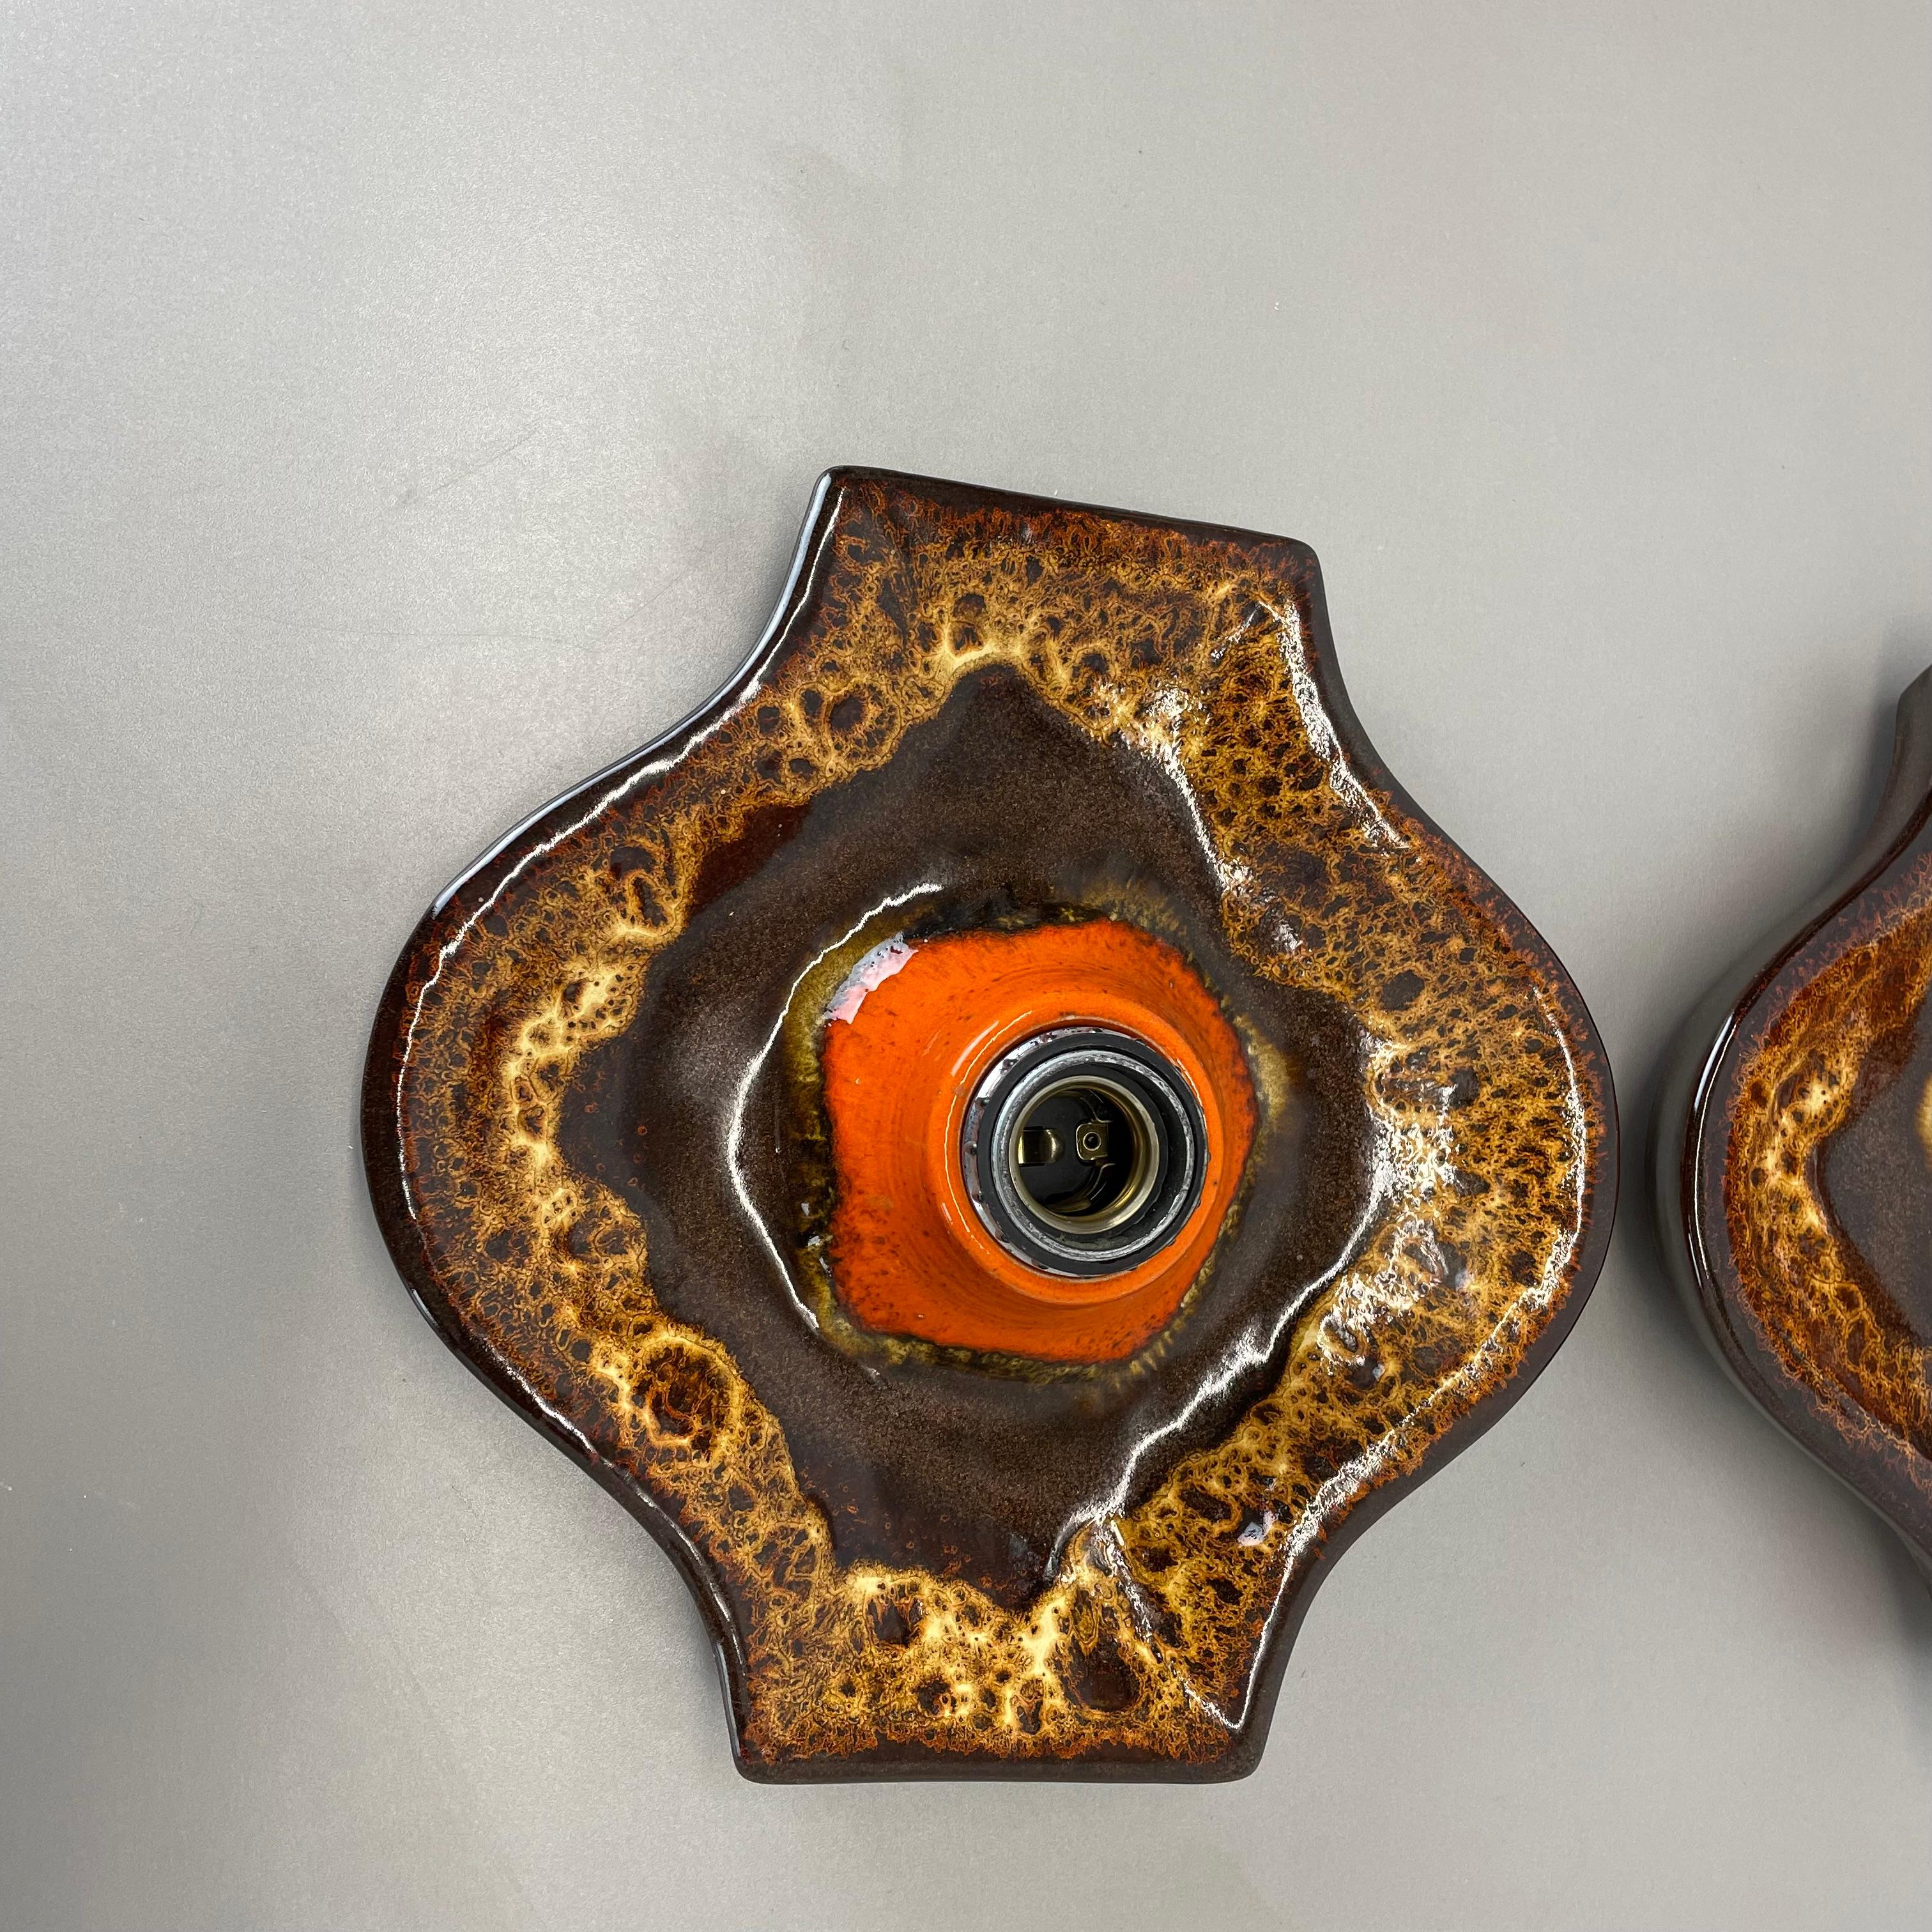 Article:

Wall light sconce set of two.


Producer:

Hustadt Lights, Germany.



Origin:

Germany.



Age:

1970s.



Description:

Original 1970s modernist German wall light made of ceramic in fat lava optic. This super rare set of two walls light